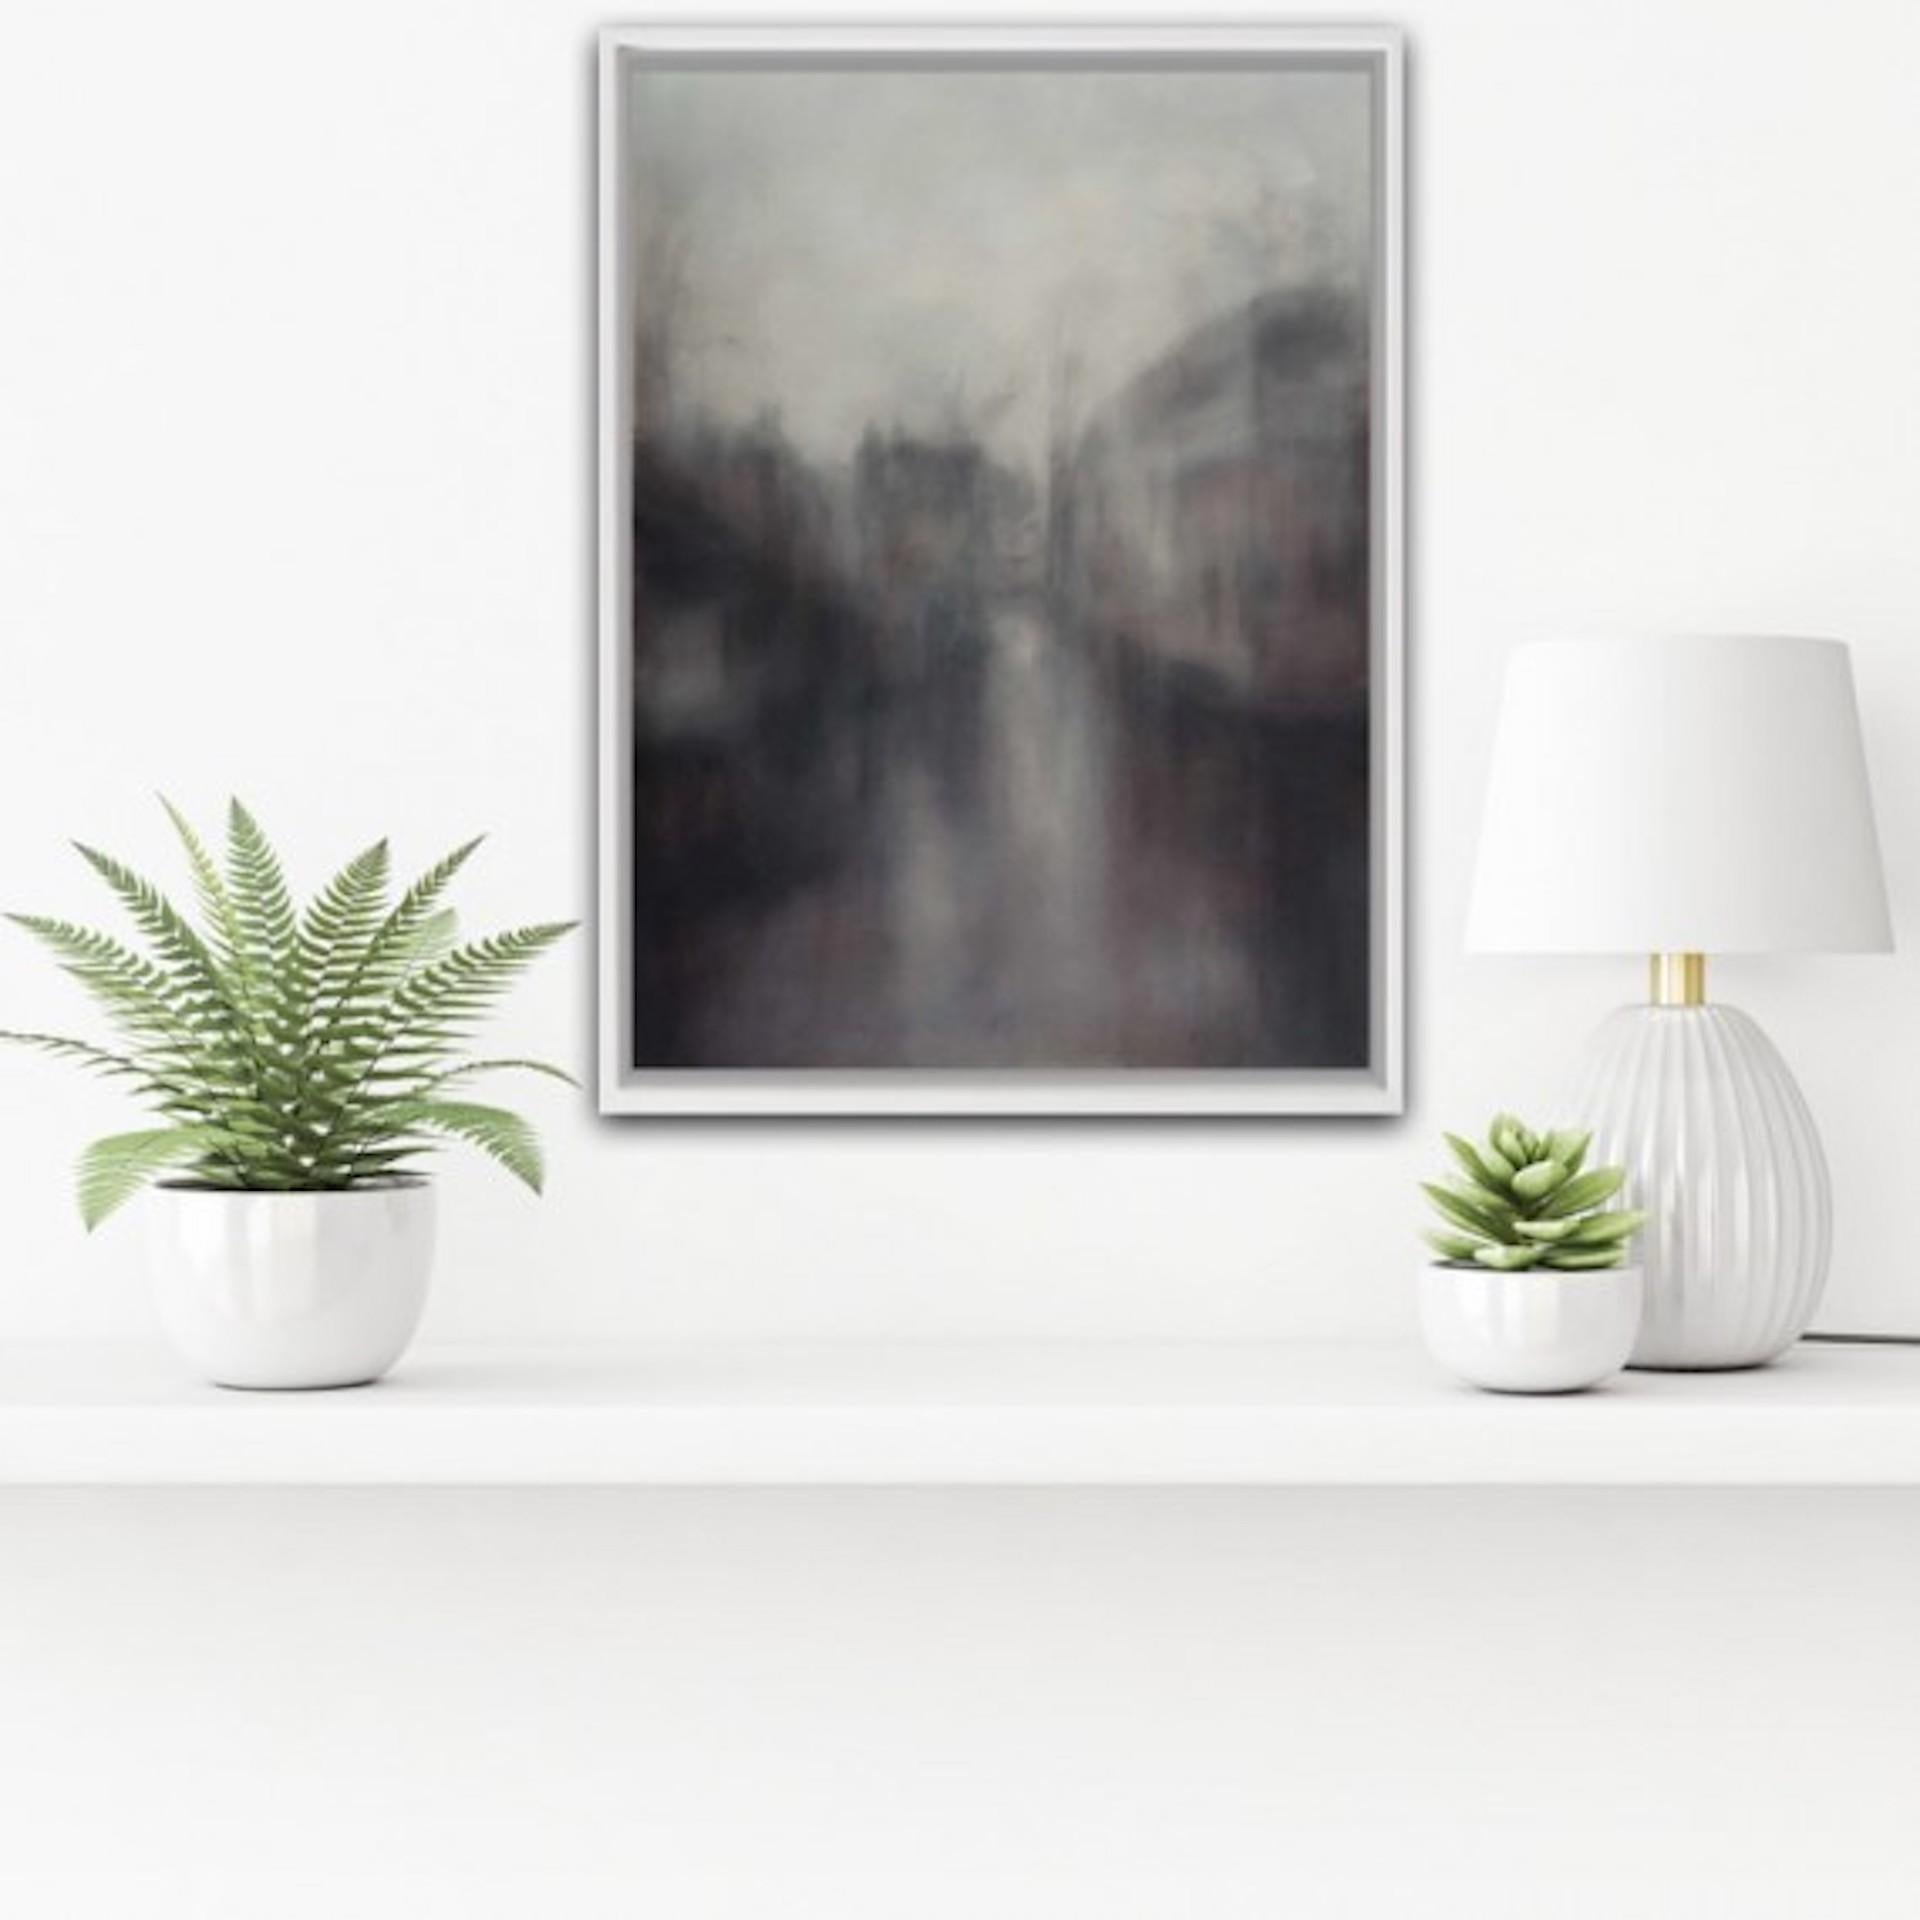 Twilight- Bruges VIII [2017]
original

Oil on Linen

Image size: H:80 cm x W:60 cm

Complete Size of Unframed Work: H:80 cm x W:60 cm x D:3cm

Sold Unframed

Please note that insitu images are purely an indication of how a piece may look

This work